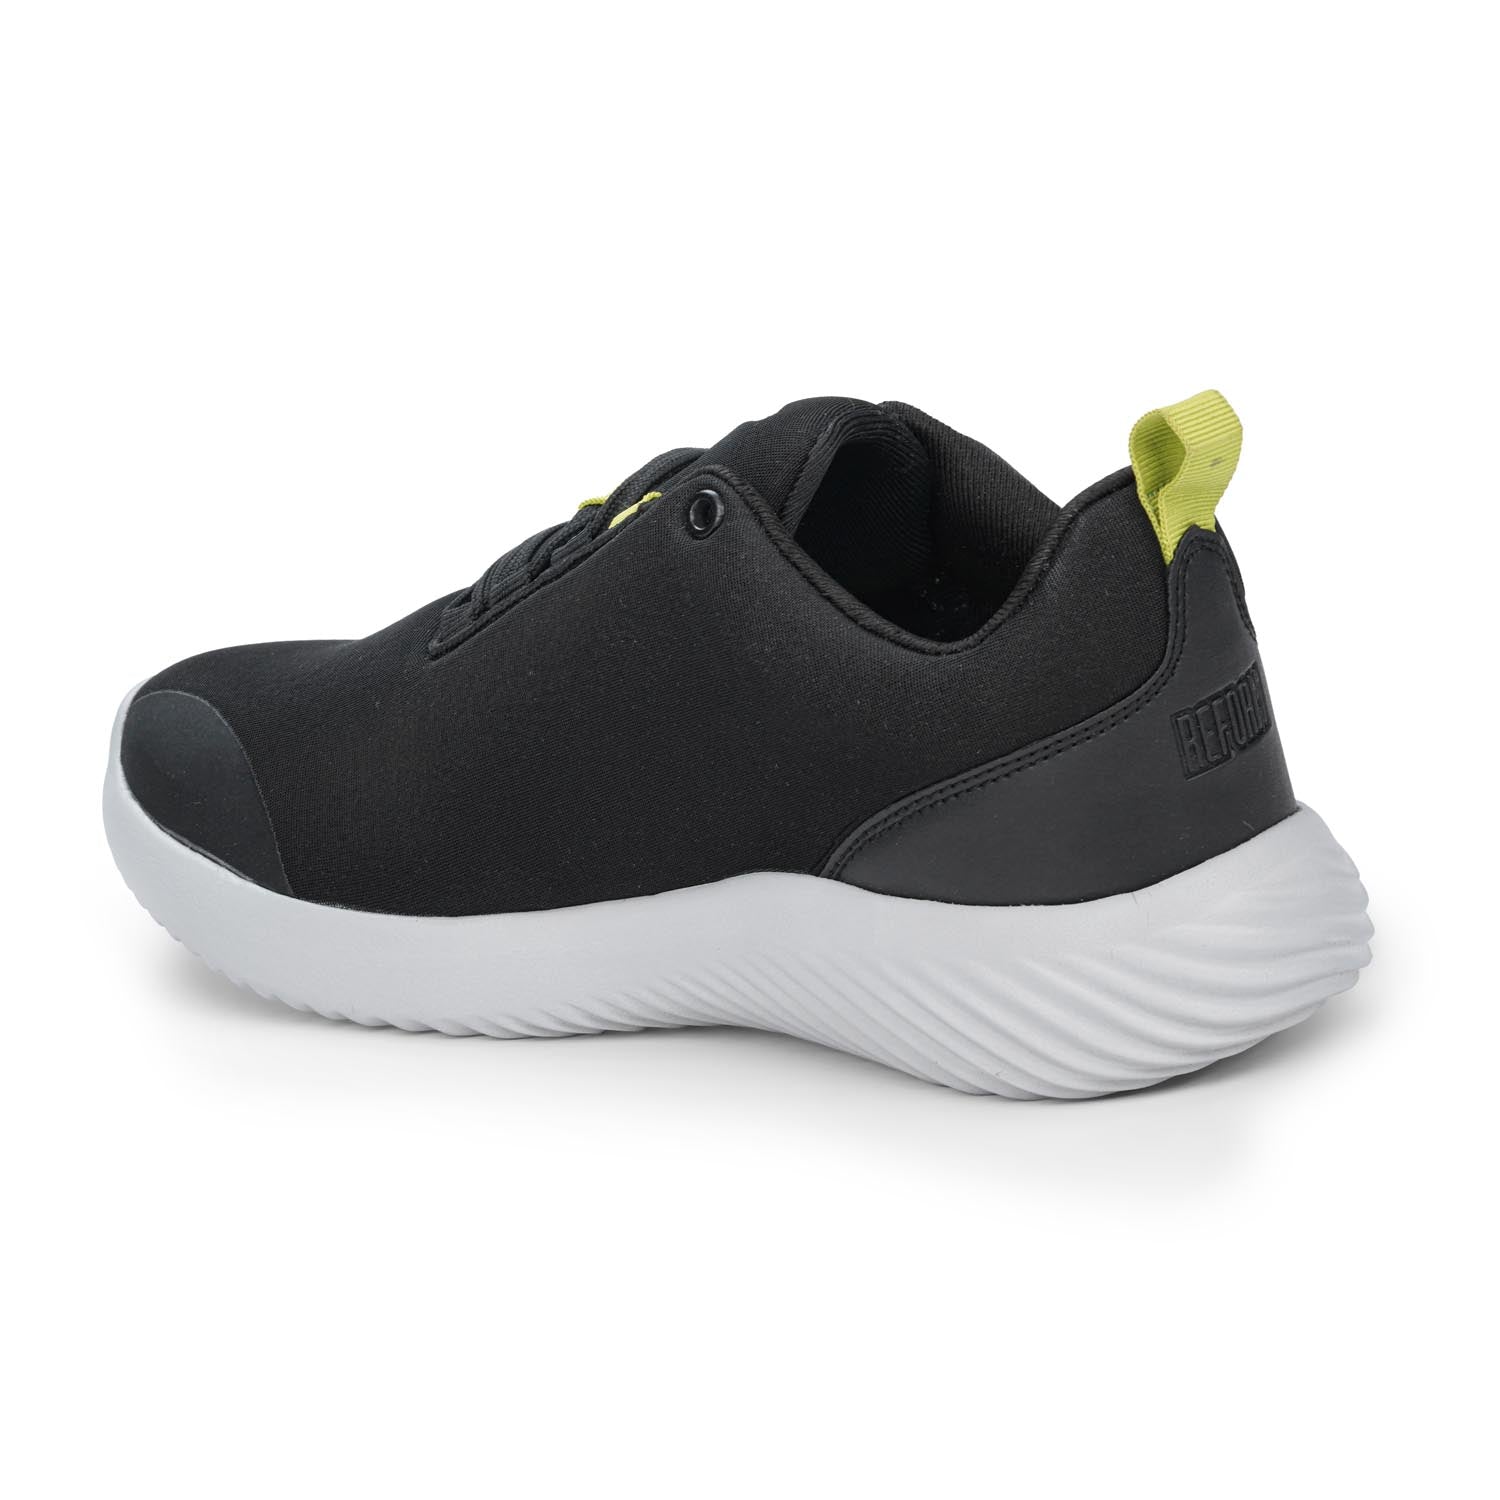 Black Solid Textile Lace Up Running Sport Shoes For Men